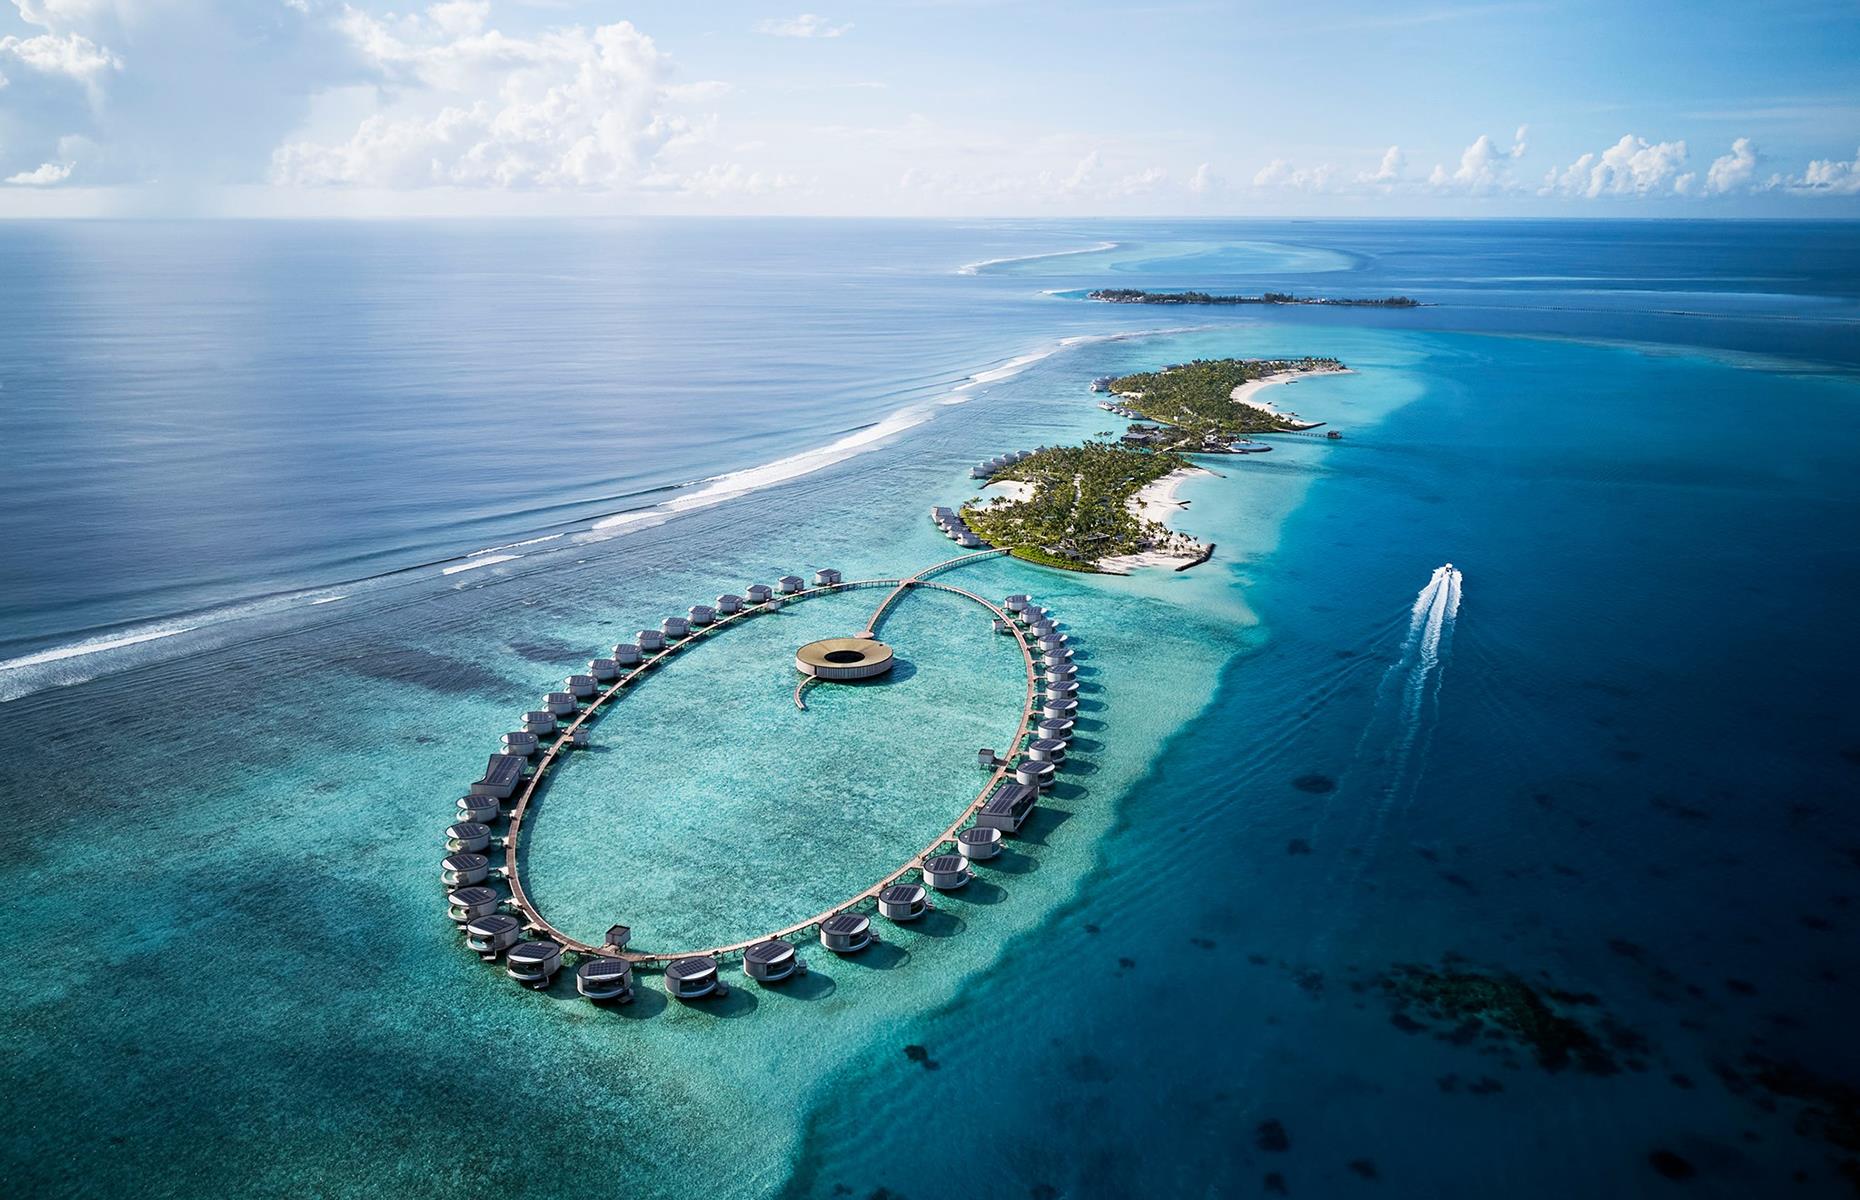 <p>The islands of the Maldives are filled with luxurious properties that make the most of their location in the Indian Ocean location, and <a href="https://www.booking.com/hotel/mv/the-ritz-carlton-maldives-fari-islands.en-gb.html">this</a> is one of the newest. Operated by Ritz-Carlton – and looking particularly spectacular when captured from the sky – it comprises sleek villas arranged in a neat oval shape above the ocean's surface. Each has a private infinity pool, rain showers, floor-to-ceiling glass windows and your own private butler. </p>